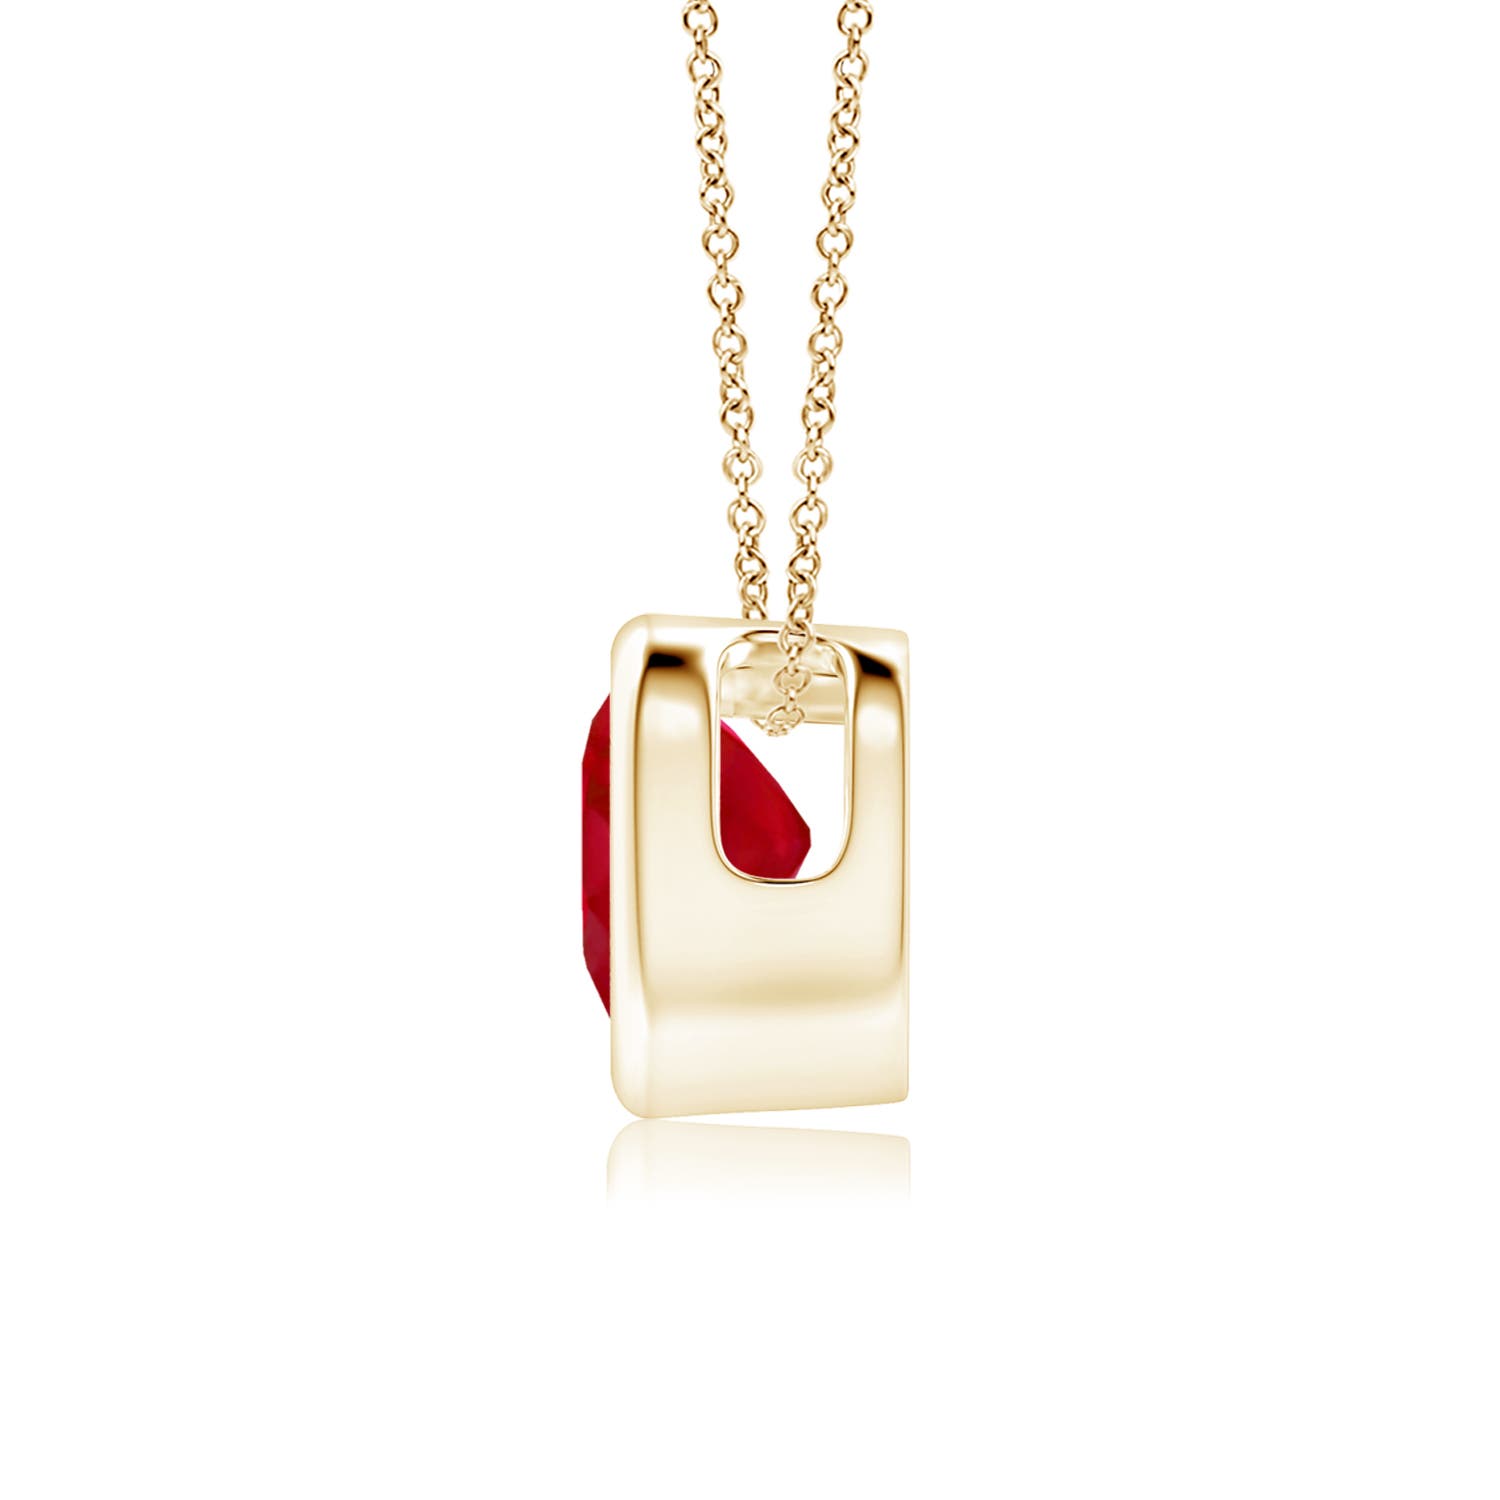 AA - Ruby / 0.55 CT / 14 KT Yellow Gold